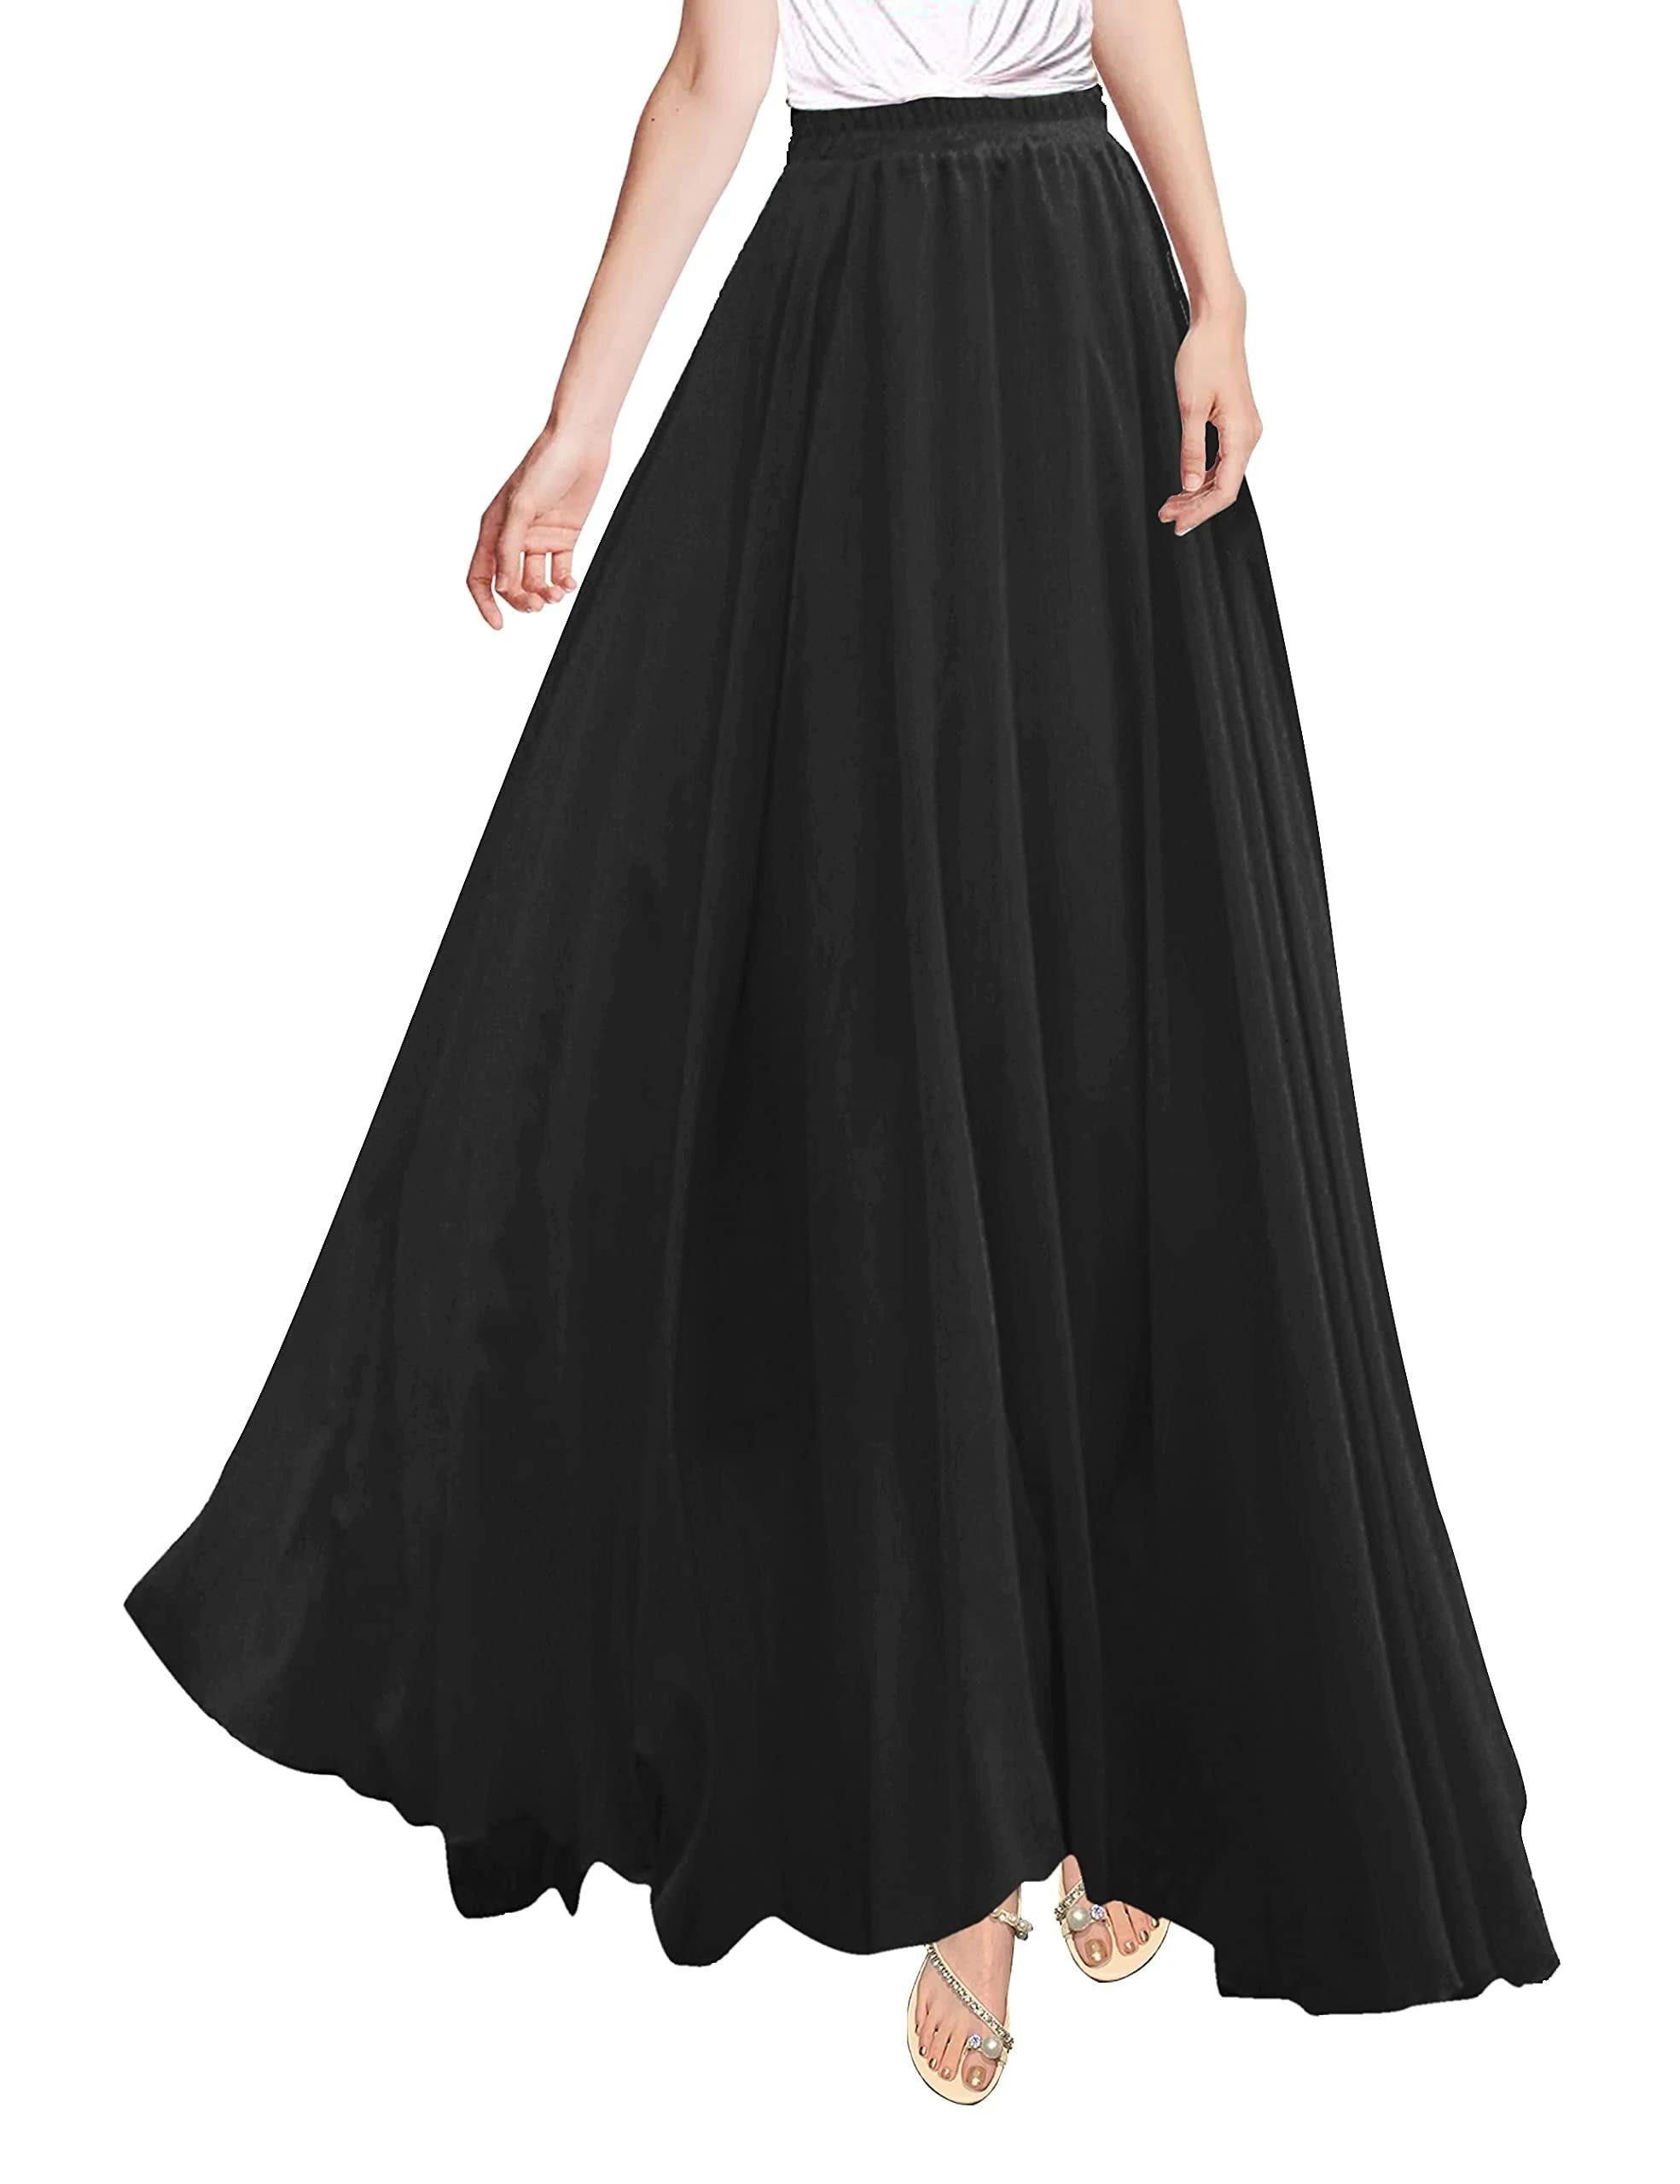 Stylish, Elastic Retro Maxi Skirt: Versatile for All Occasions - Made of Durable Chiffon Material | Image